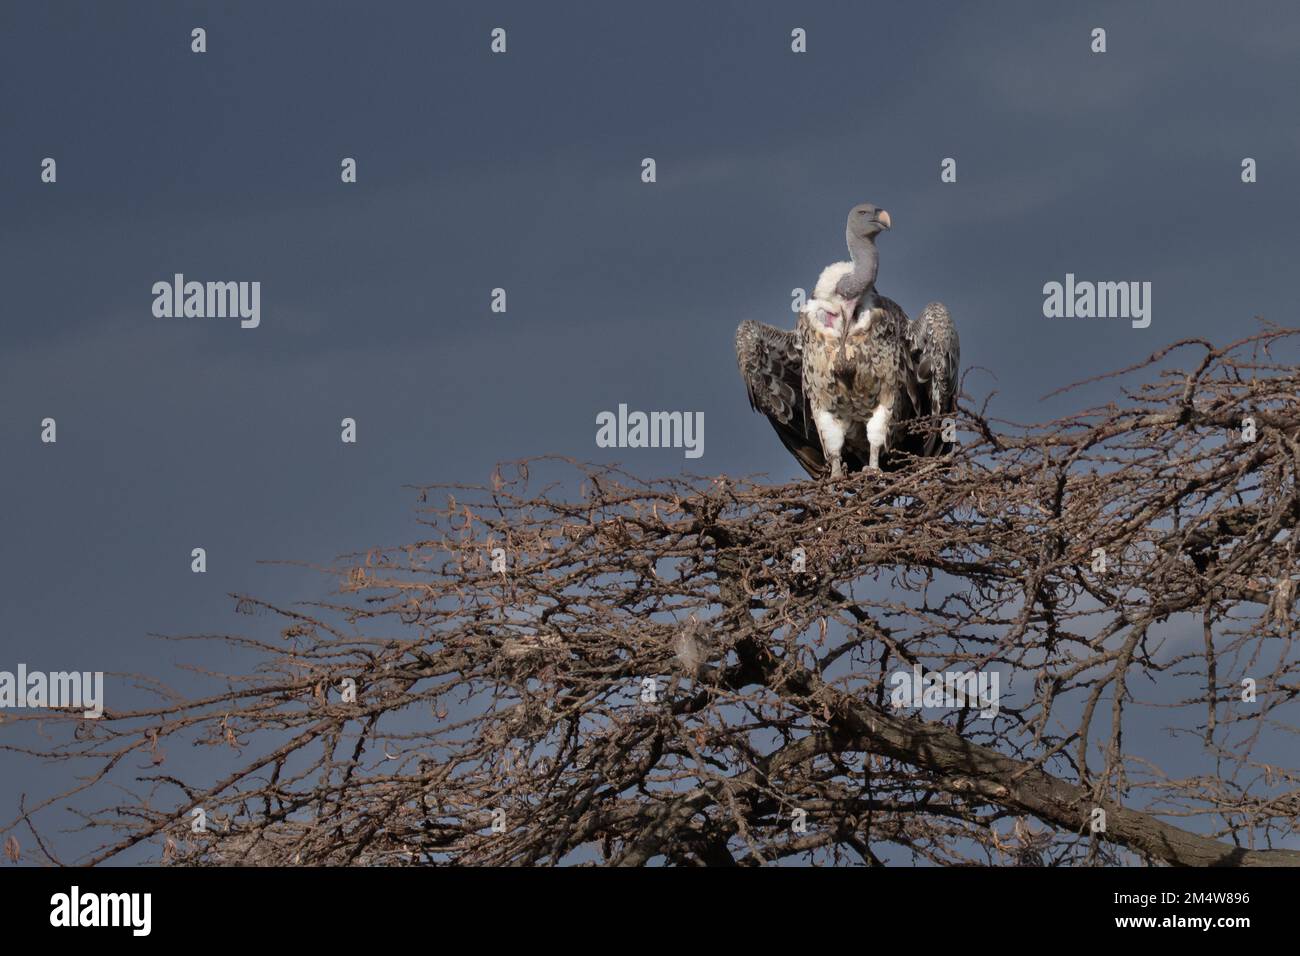 Ruppell's vulture (Gyps rueppellii) on a treetop. This large vulture, also known as Rupell's Griffon, inhabits arid and semi-arid parts of central Afr Stock Photo